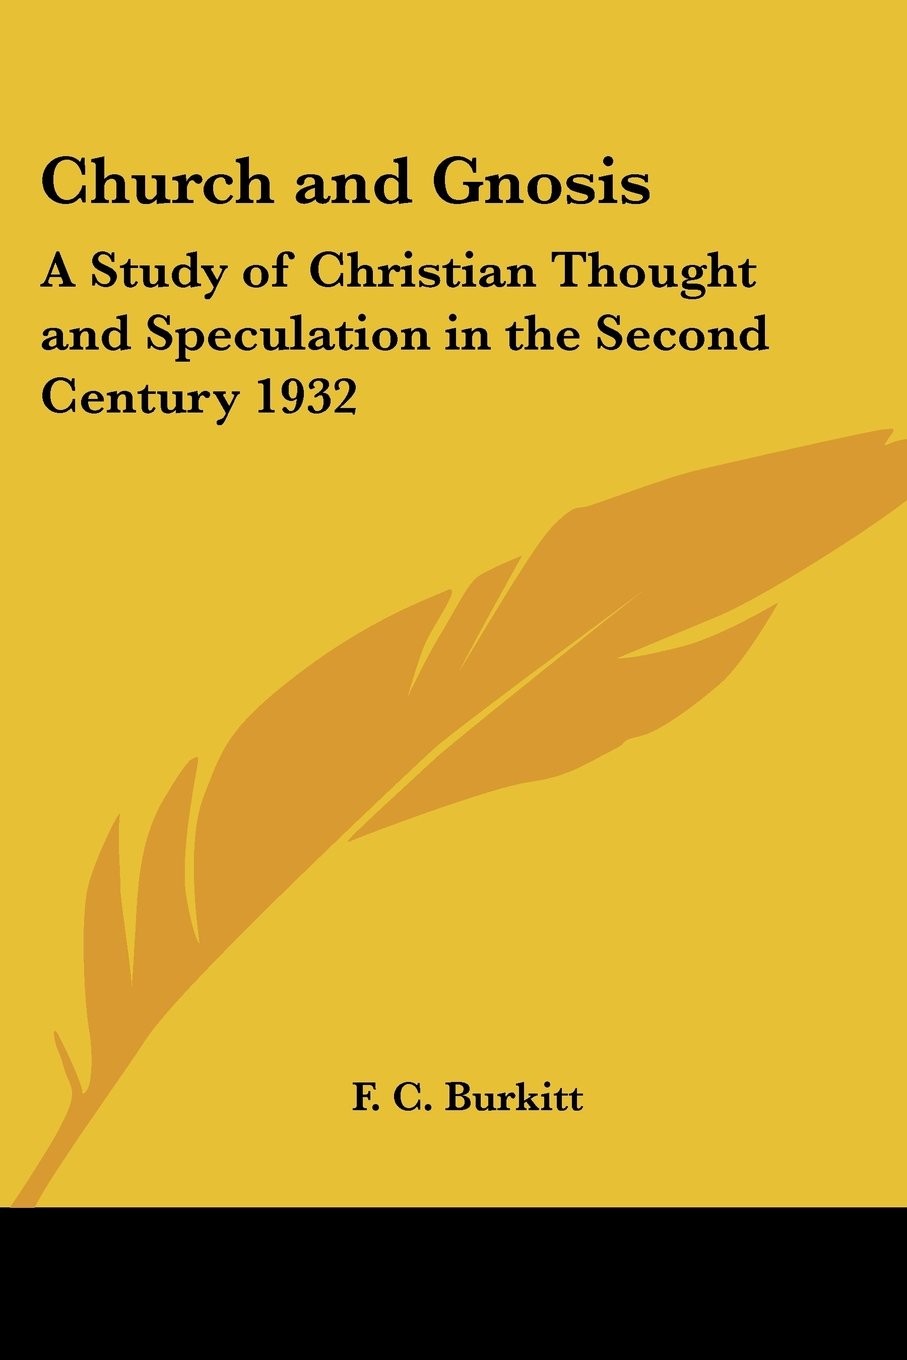 Church & Gnosis: A Study of Christian Thought and Speculation in the Second Century